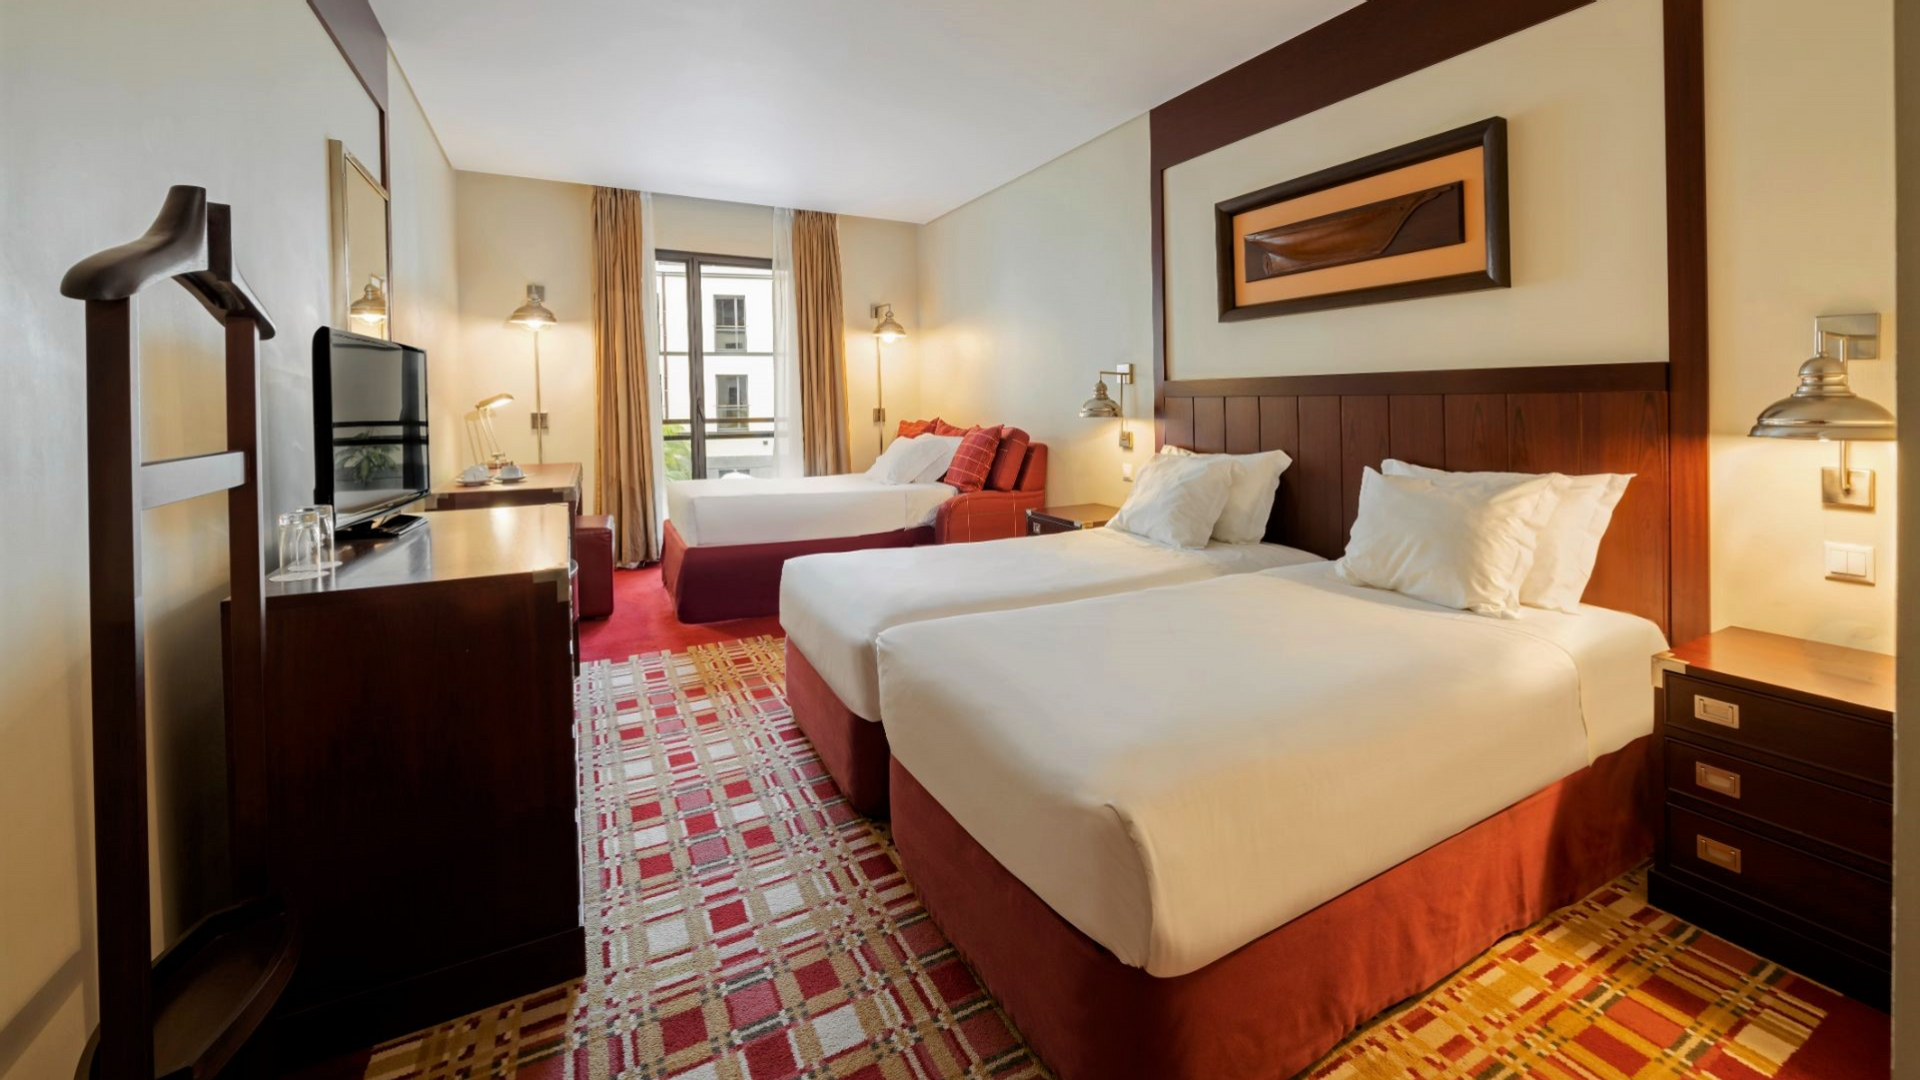 Standard Plus Room with 3 beds at Bensaude Hotels Collection